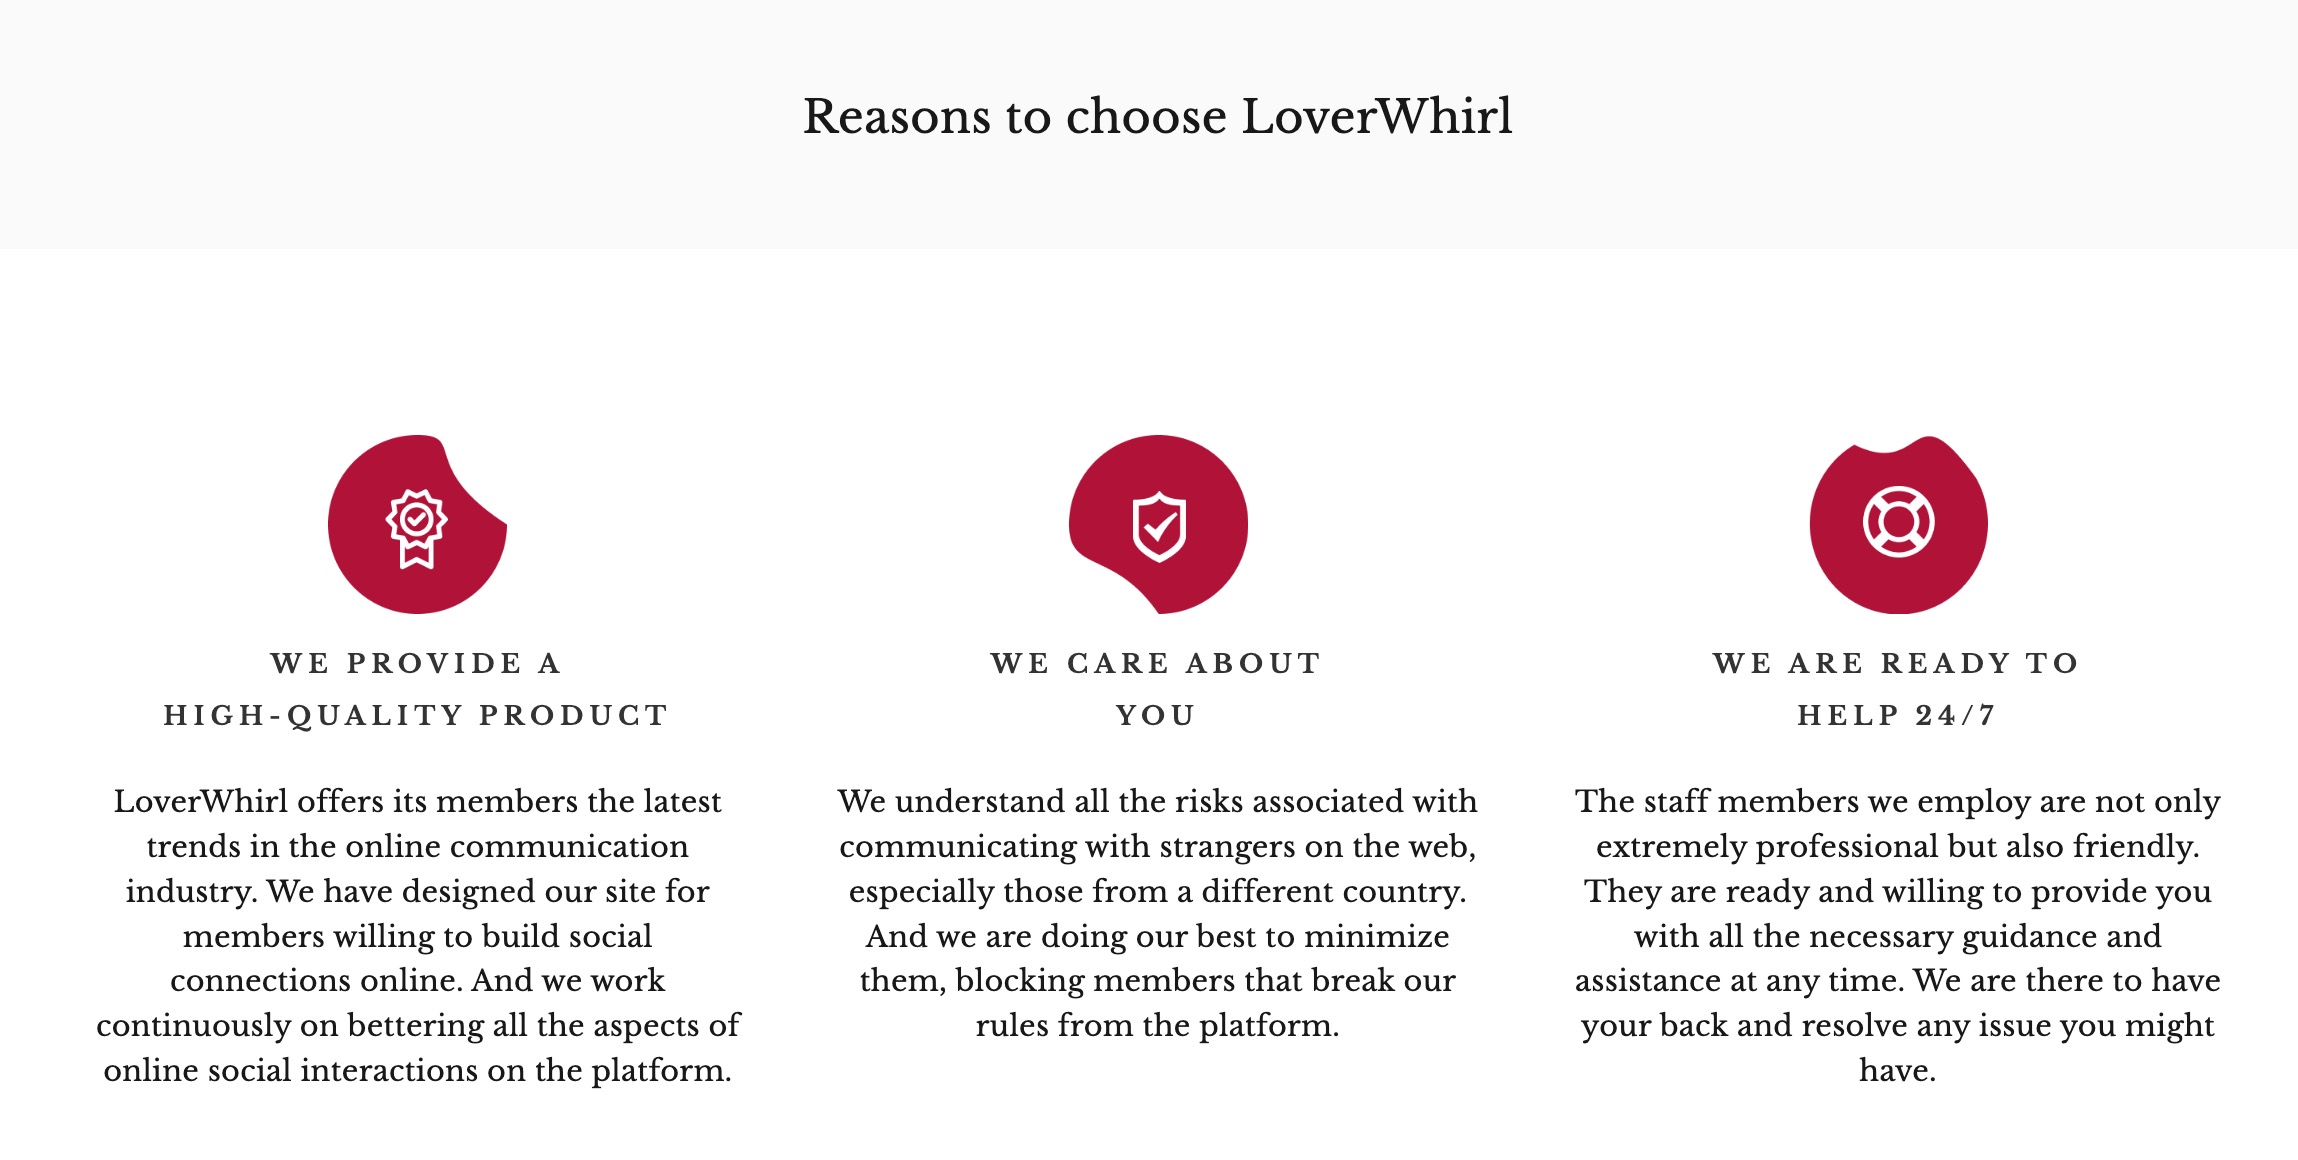 LoverWhirl features